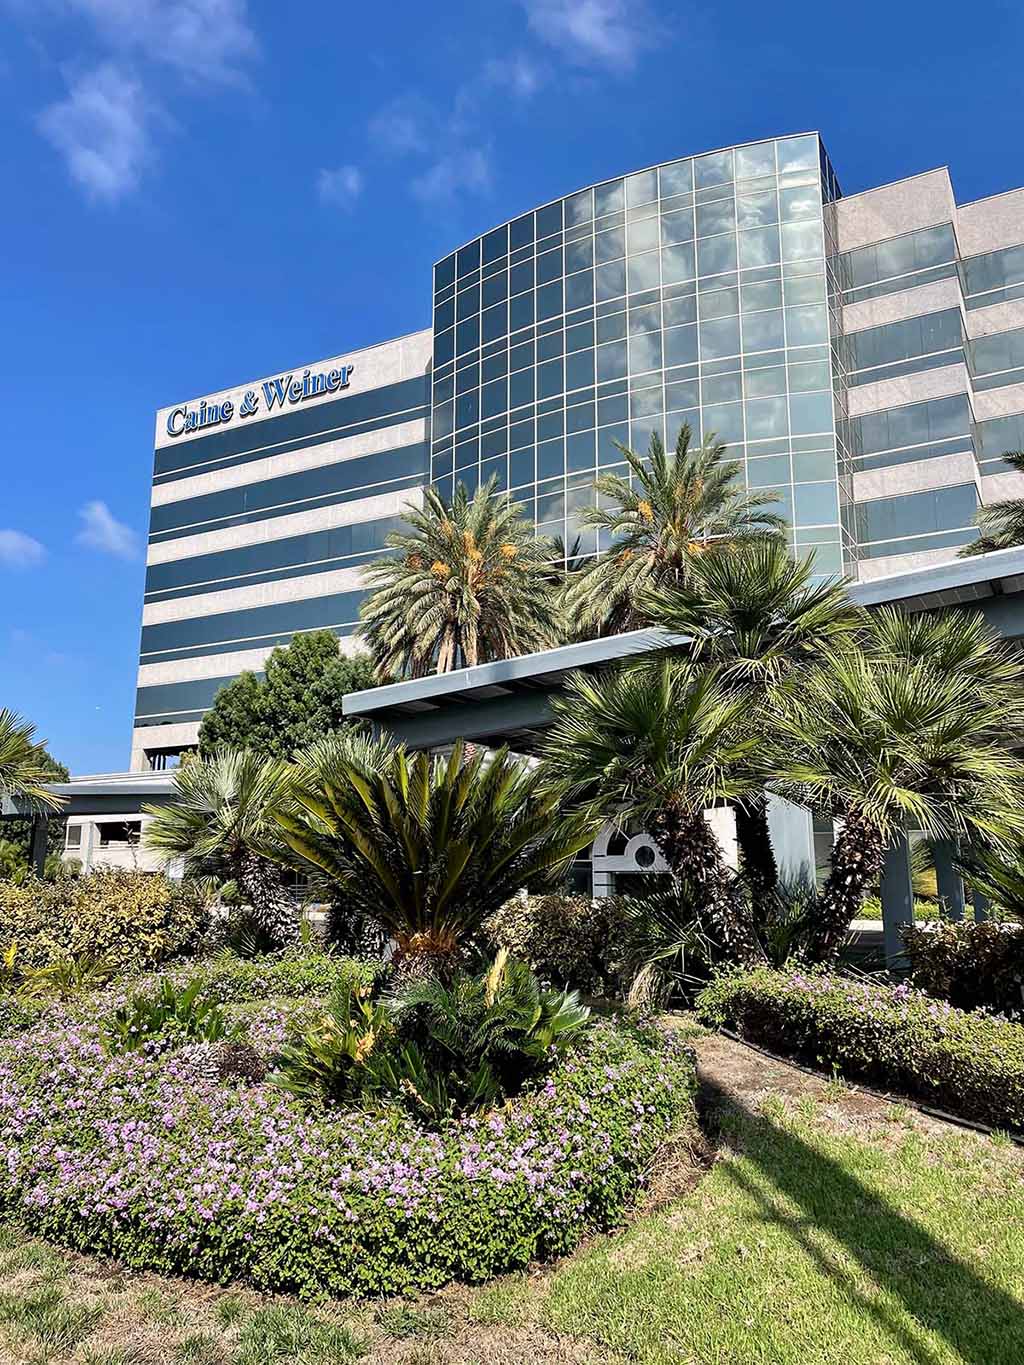 Southern California Multi-Specialty Center serves patients from La Crescenta-Montrose